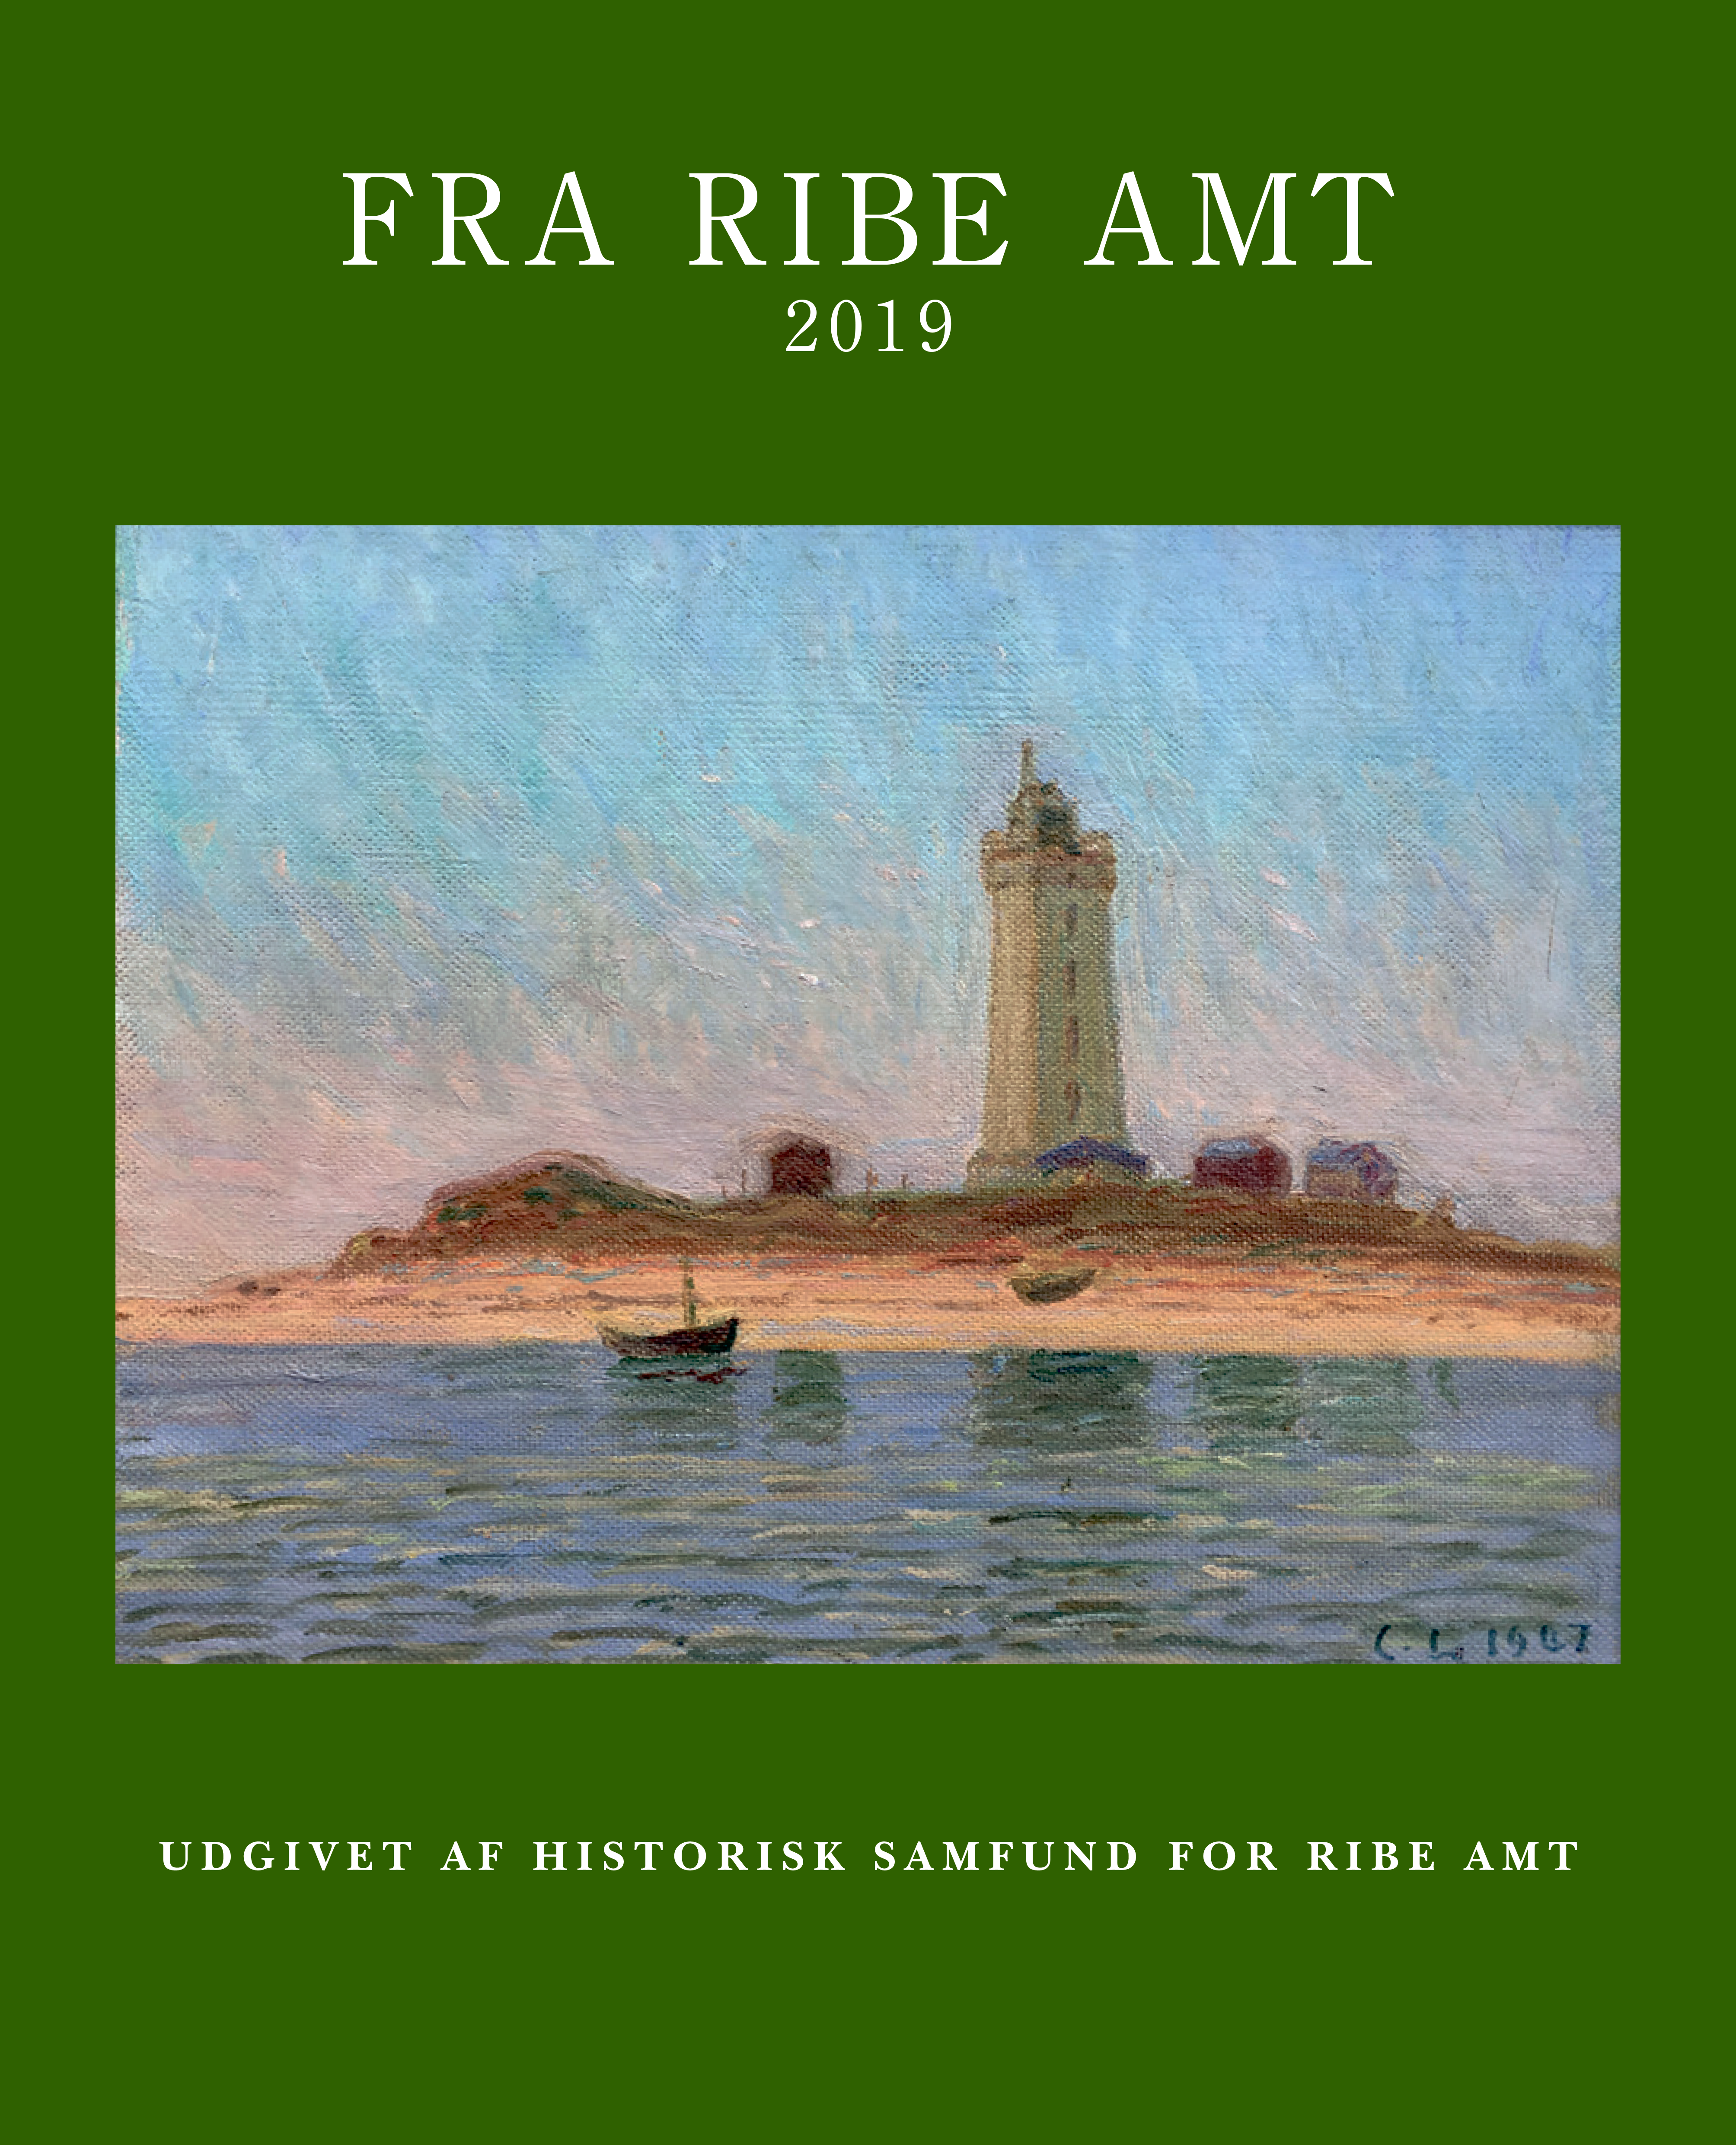 					View 2019: Fra Ribe Amt
				